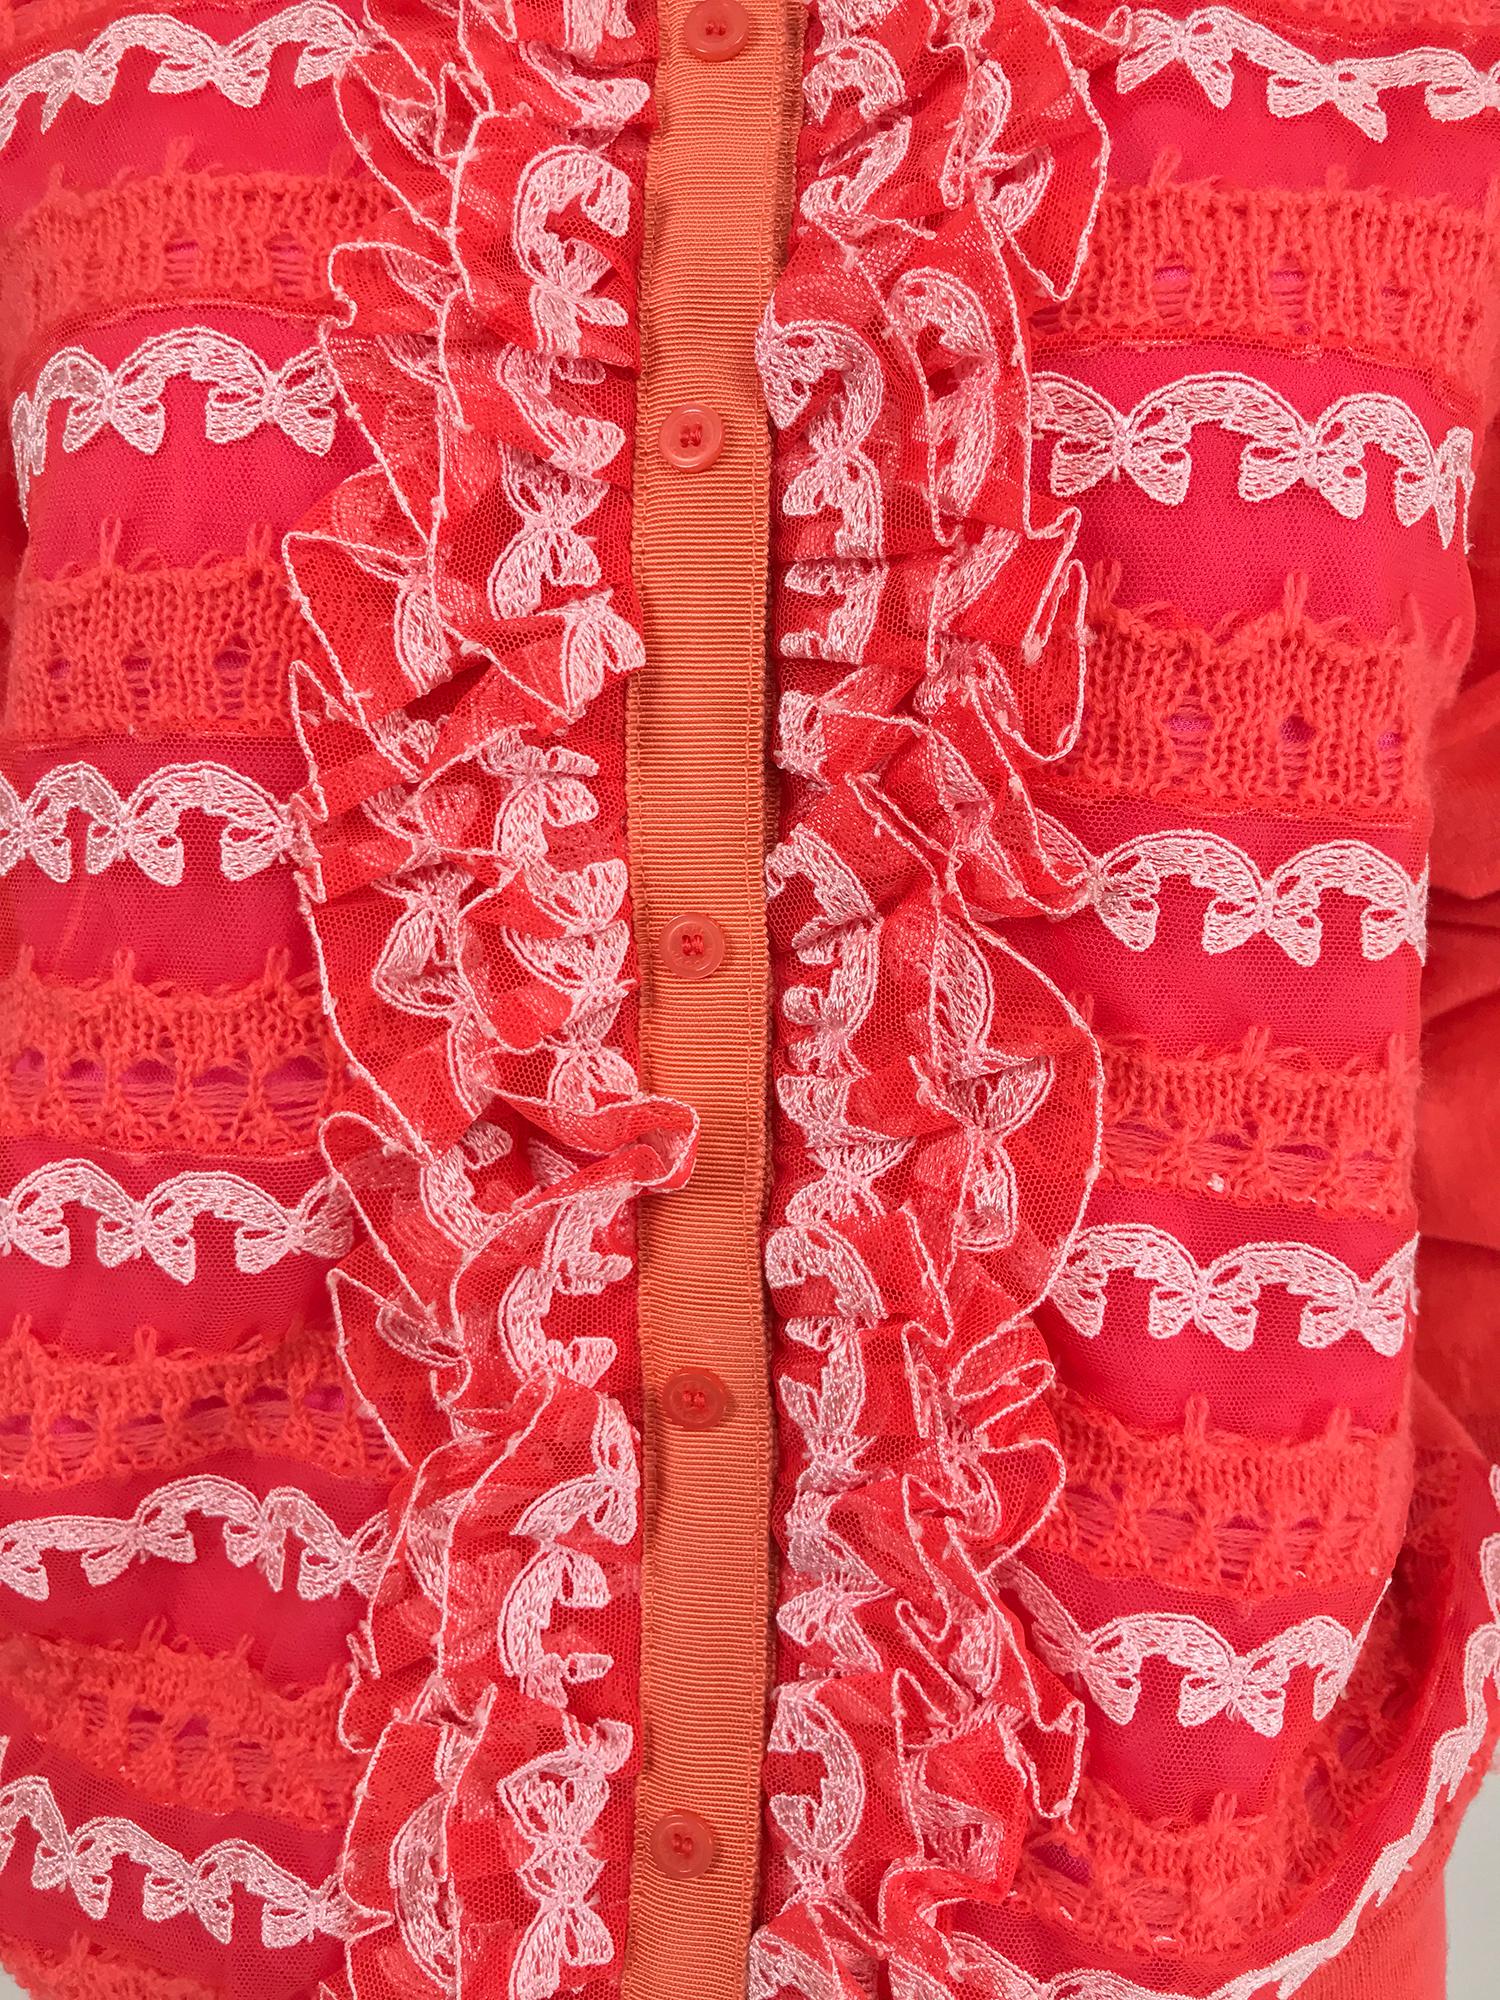 Red Marc Jacobs Orange Knit Collage Cardigan Sweater M For Sale